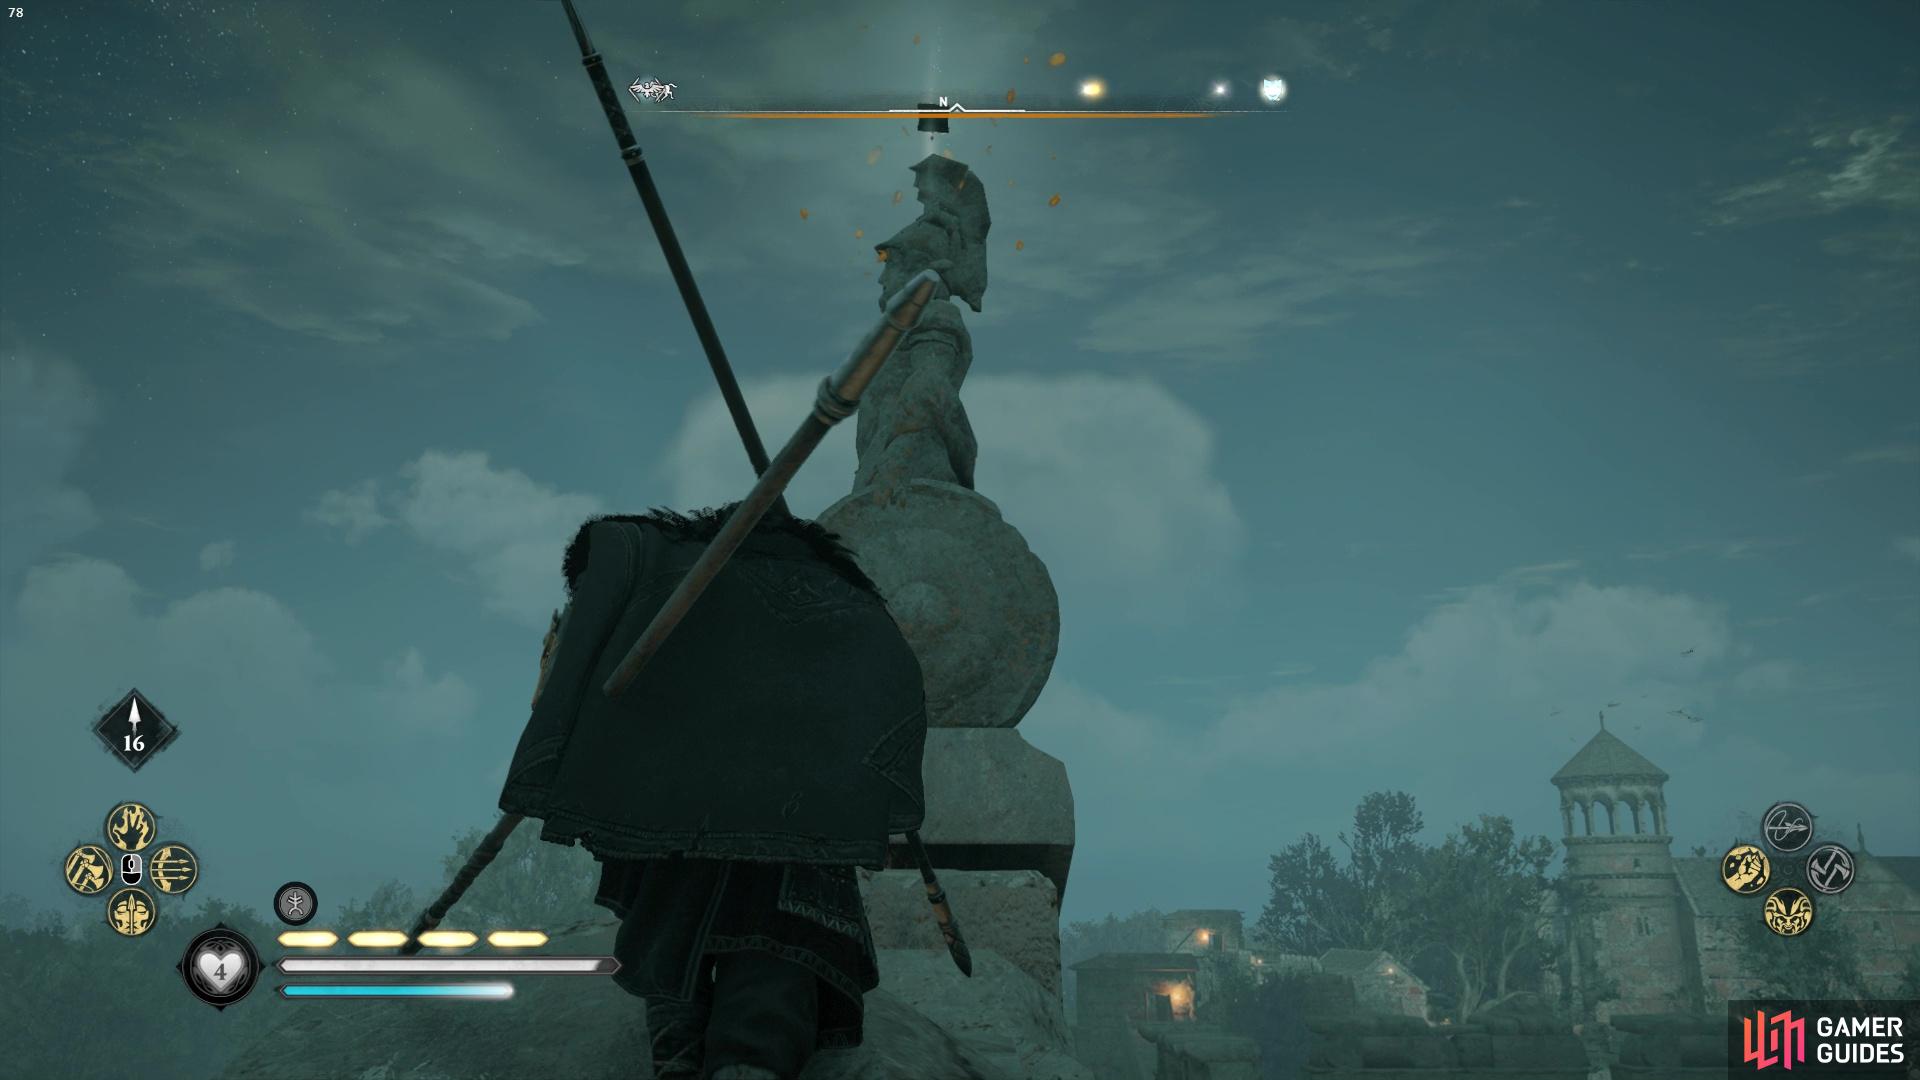 Itll land on the top of a statue nearby.